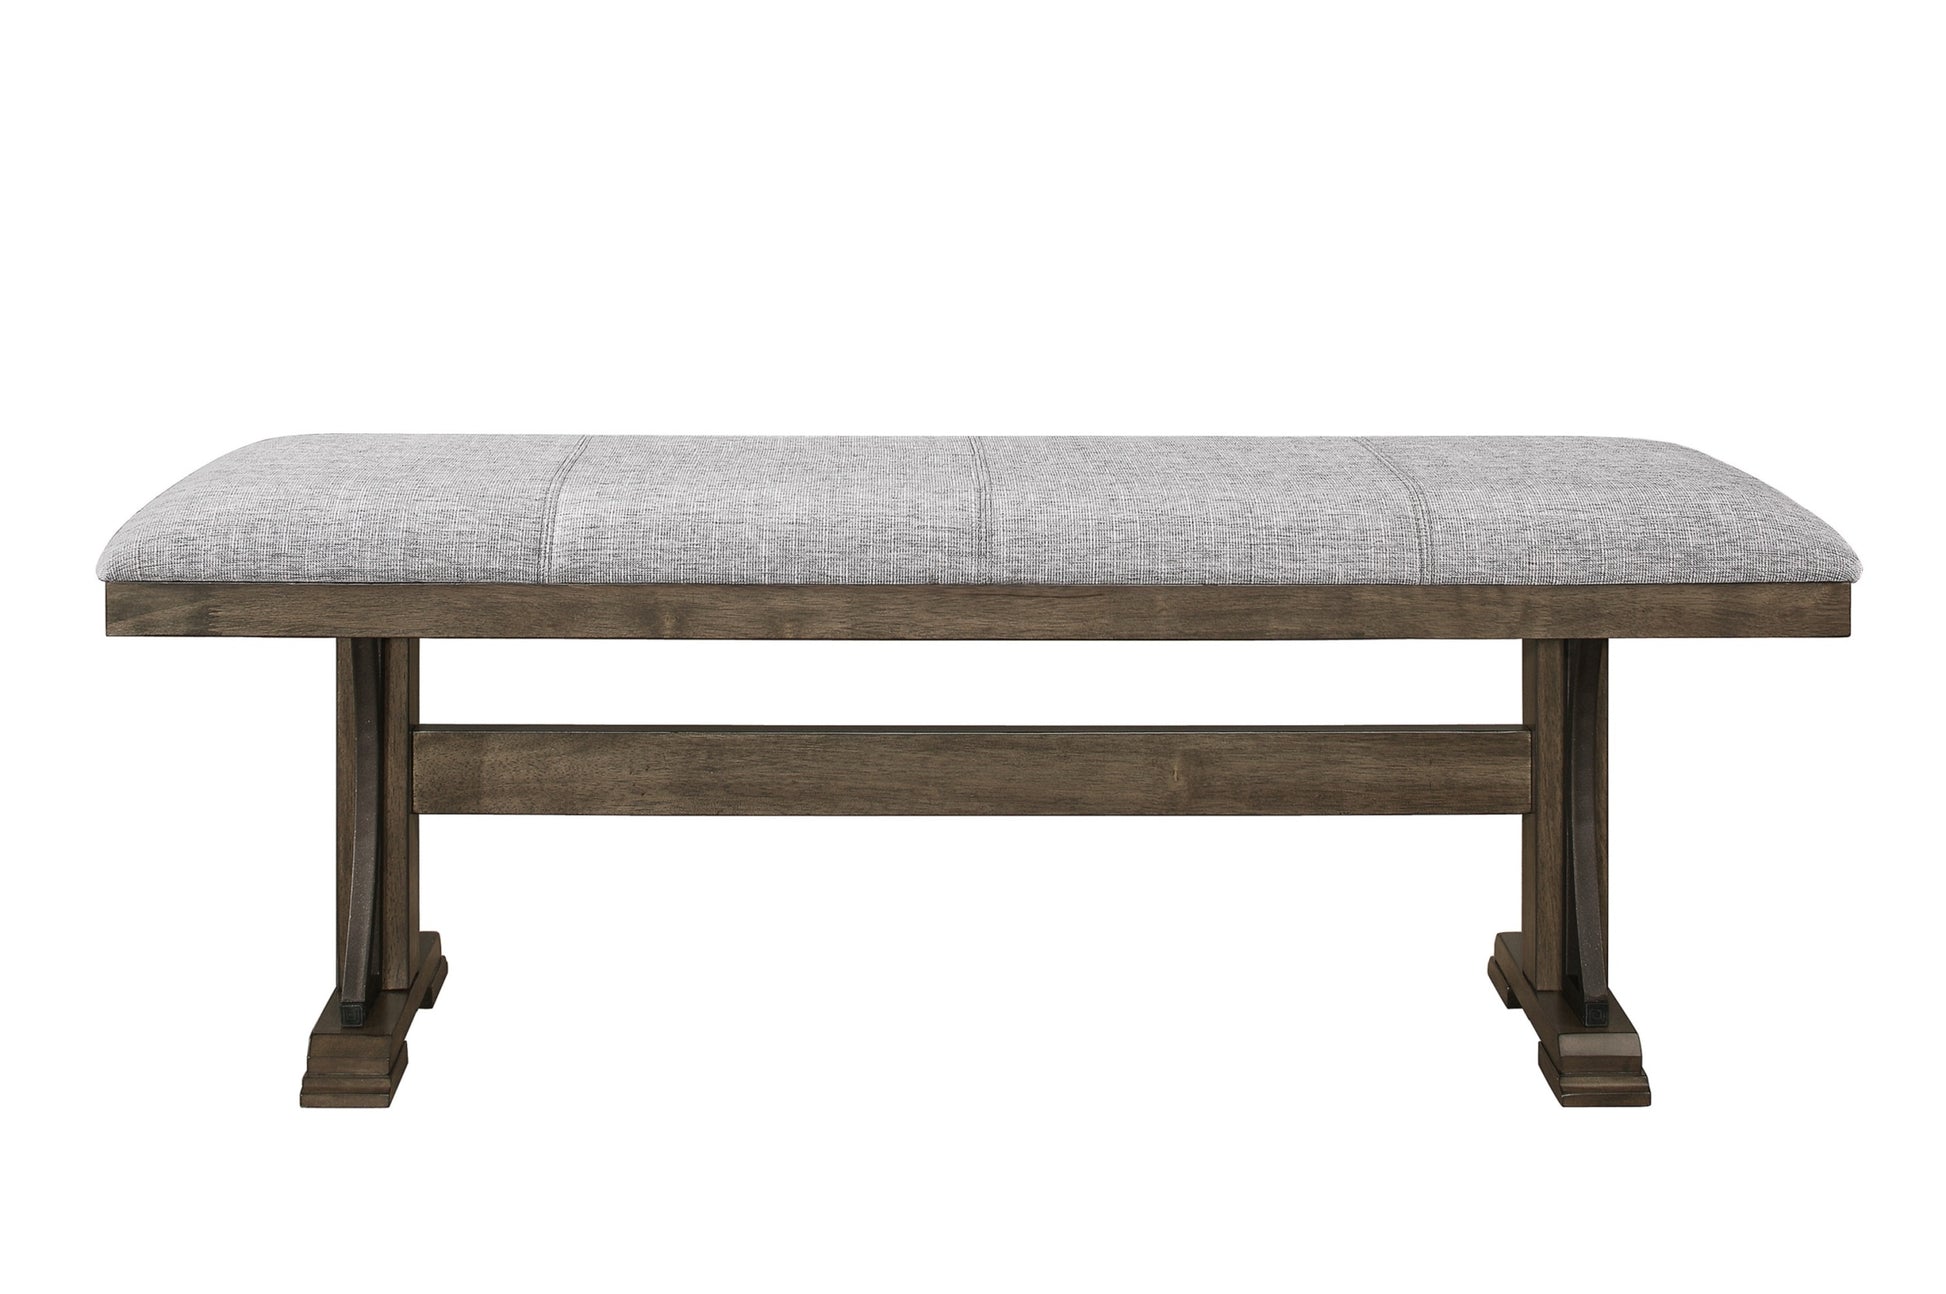 1pc transitional style bench upholstered seat brown brown - rectangular - beige - casual-transitional